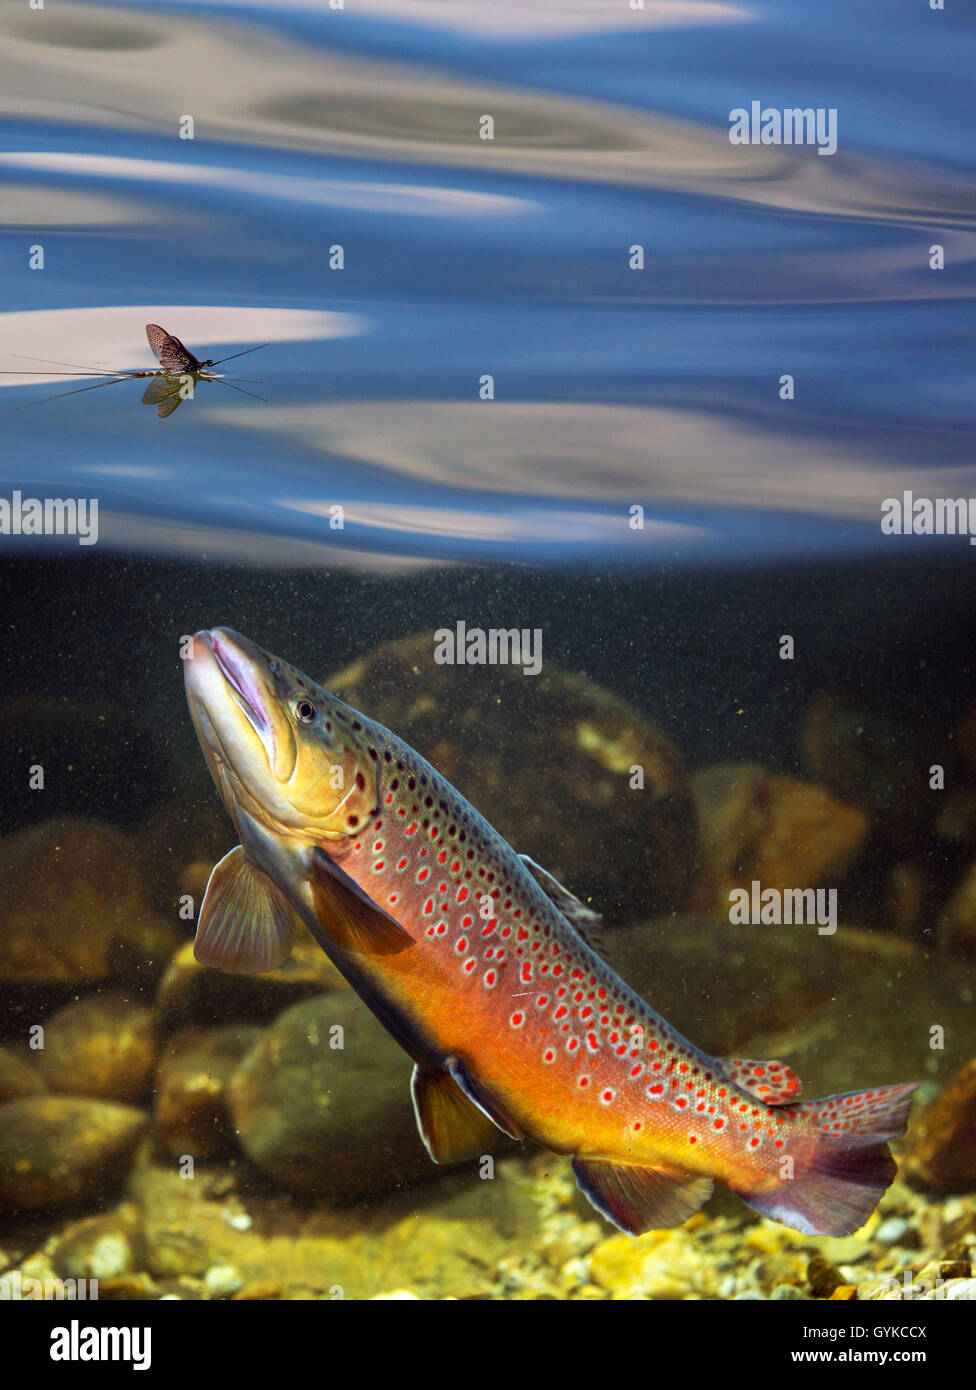 brown trout, river trout, brook trout (Salmo trutta fario), ascending to day fly floating on water surface, Germany Stock Photo